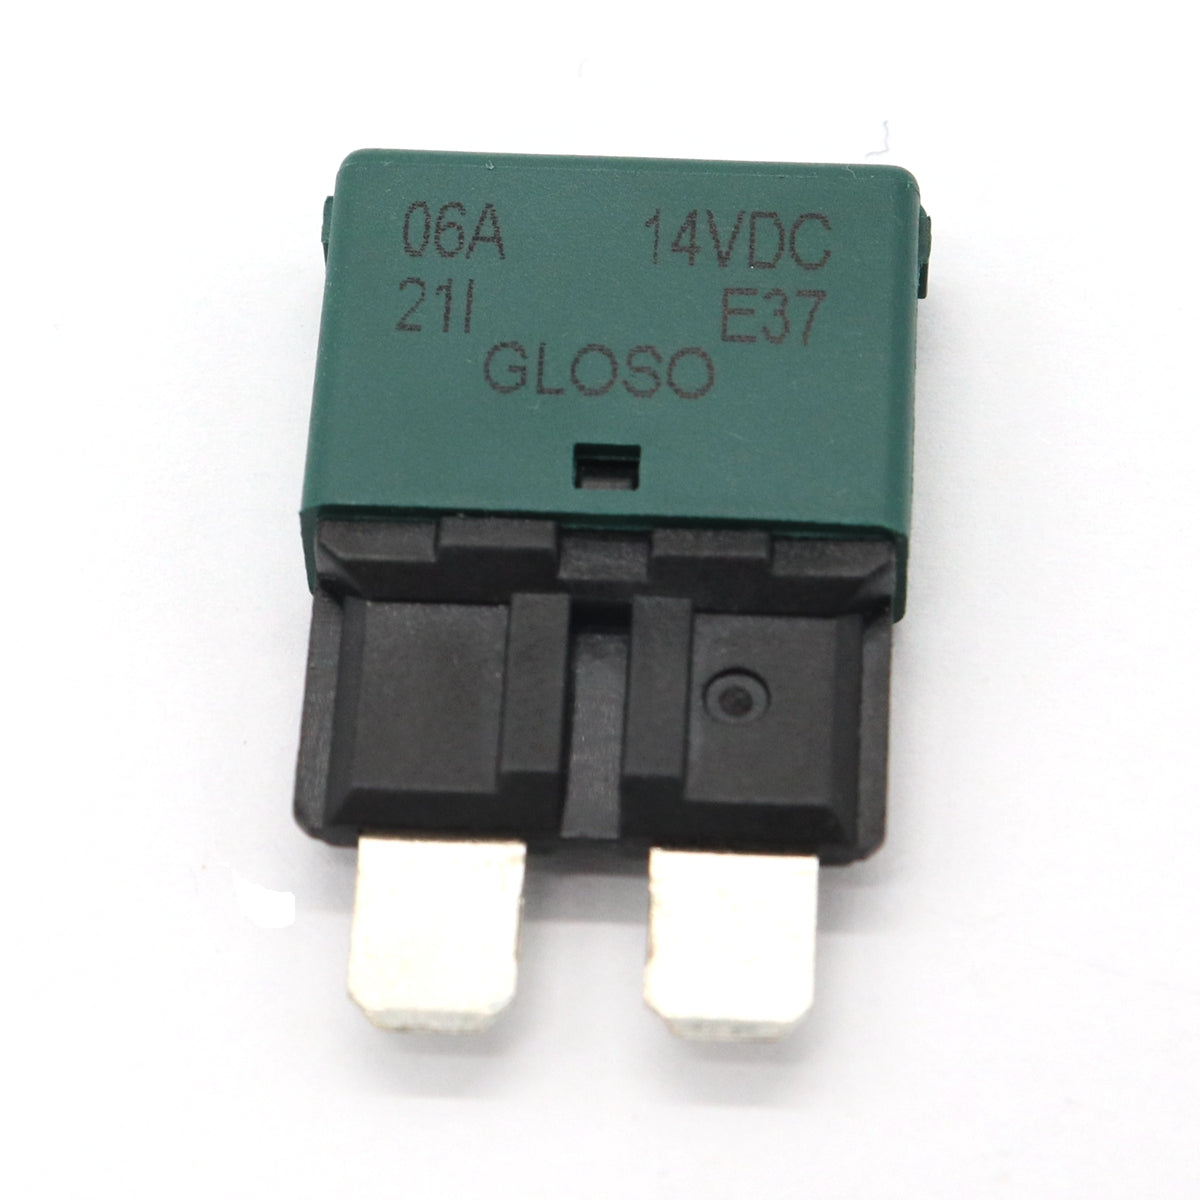 Dim Gray DC 28V 5-30A Reettable Circuit Breaker Fuse Reset Blade for Marine Automotive